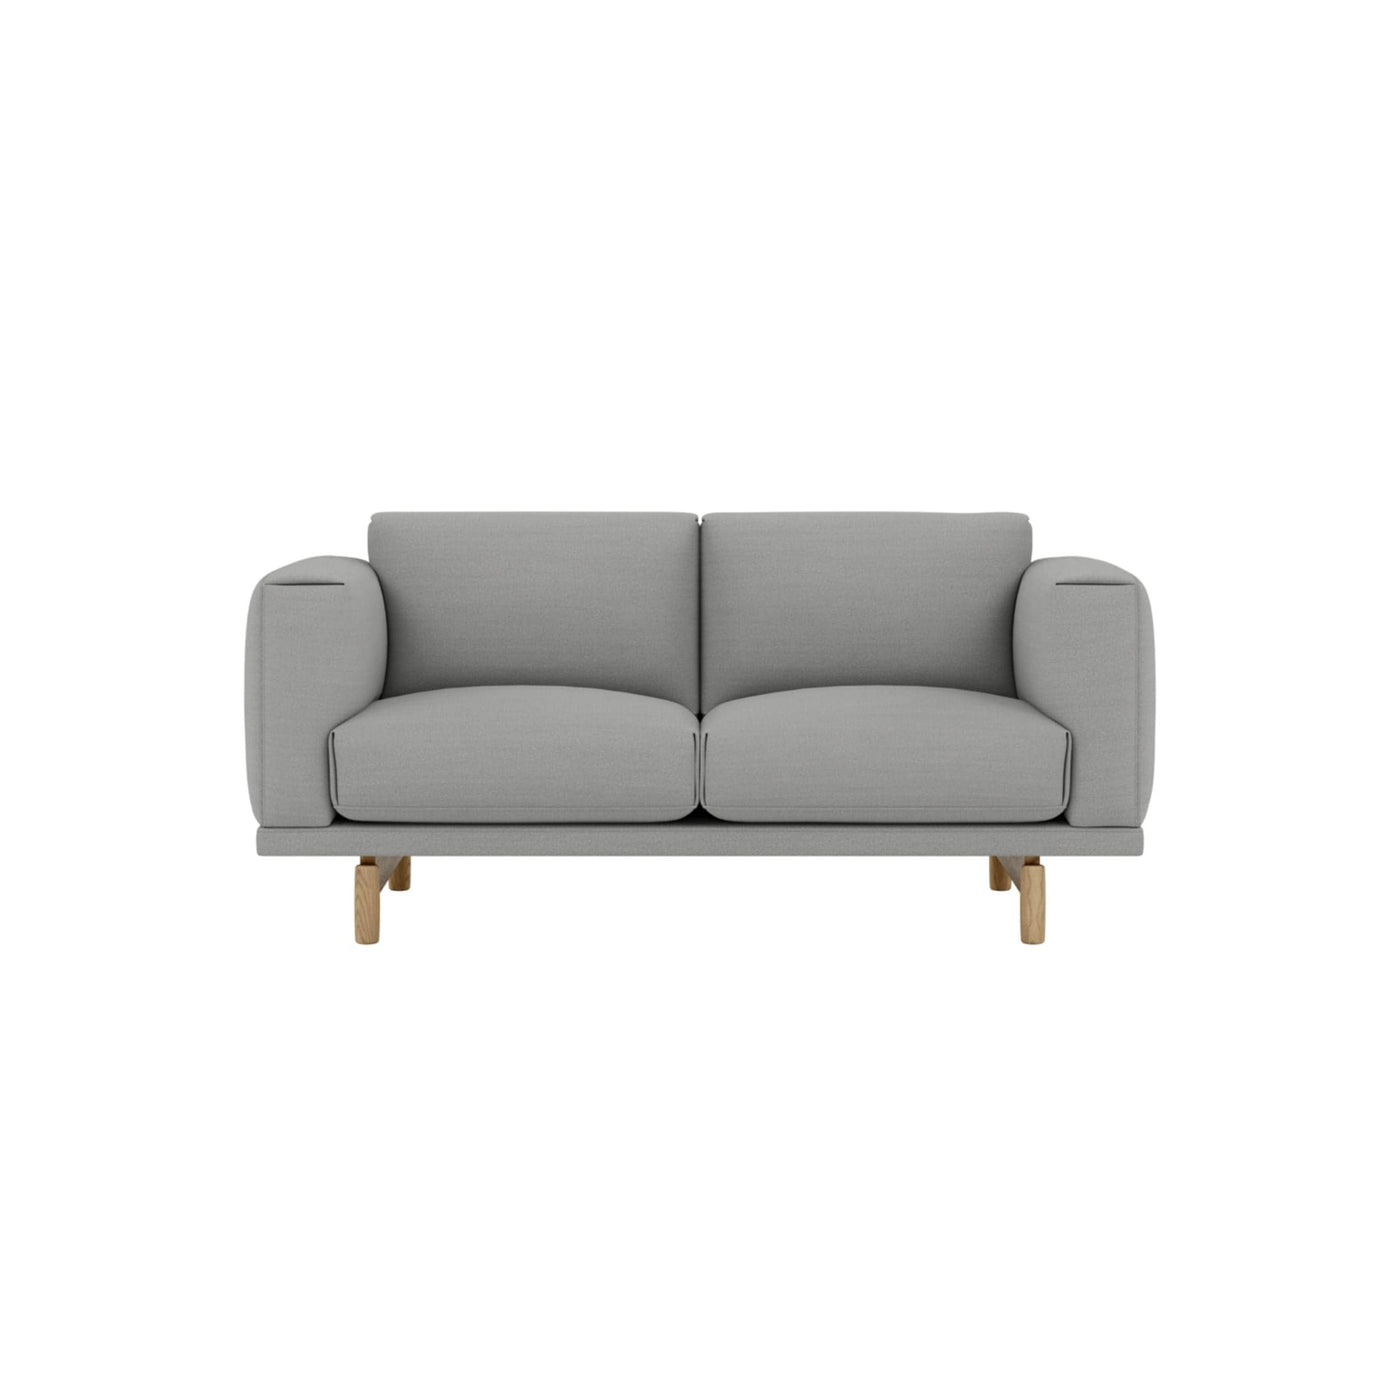 Muuto Rest Studio Sofa in hallingdal 123 light grey. Made to order from someday designs. #colour_hallingdal-123-grey